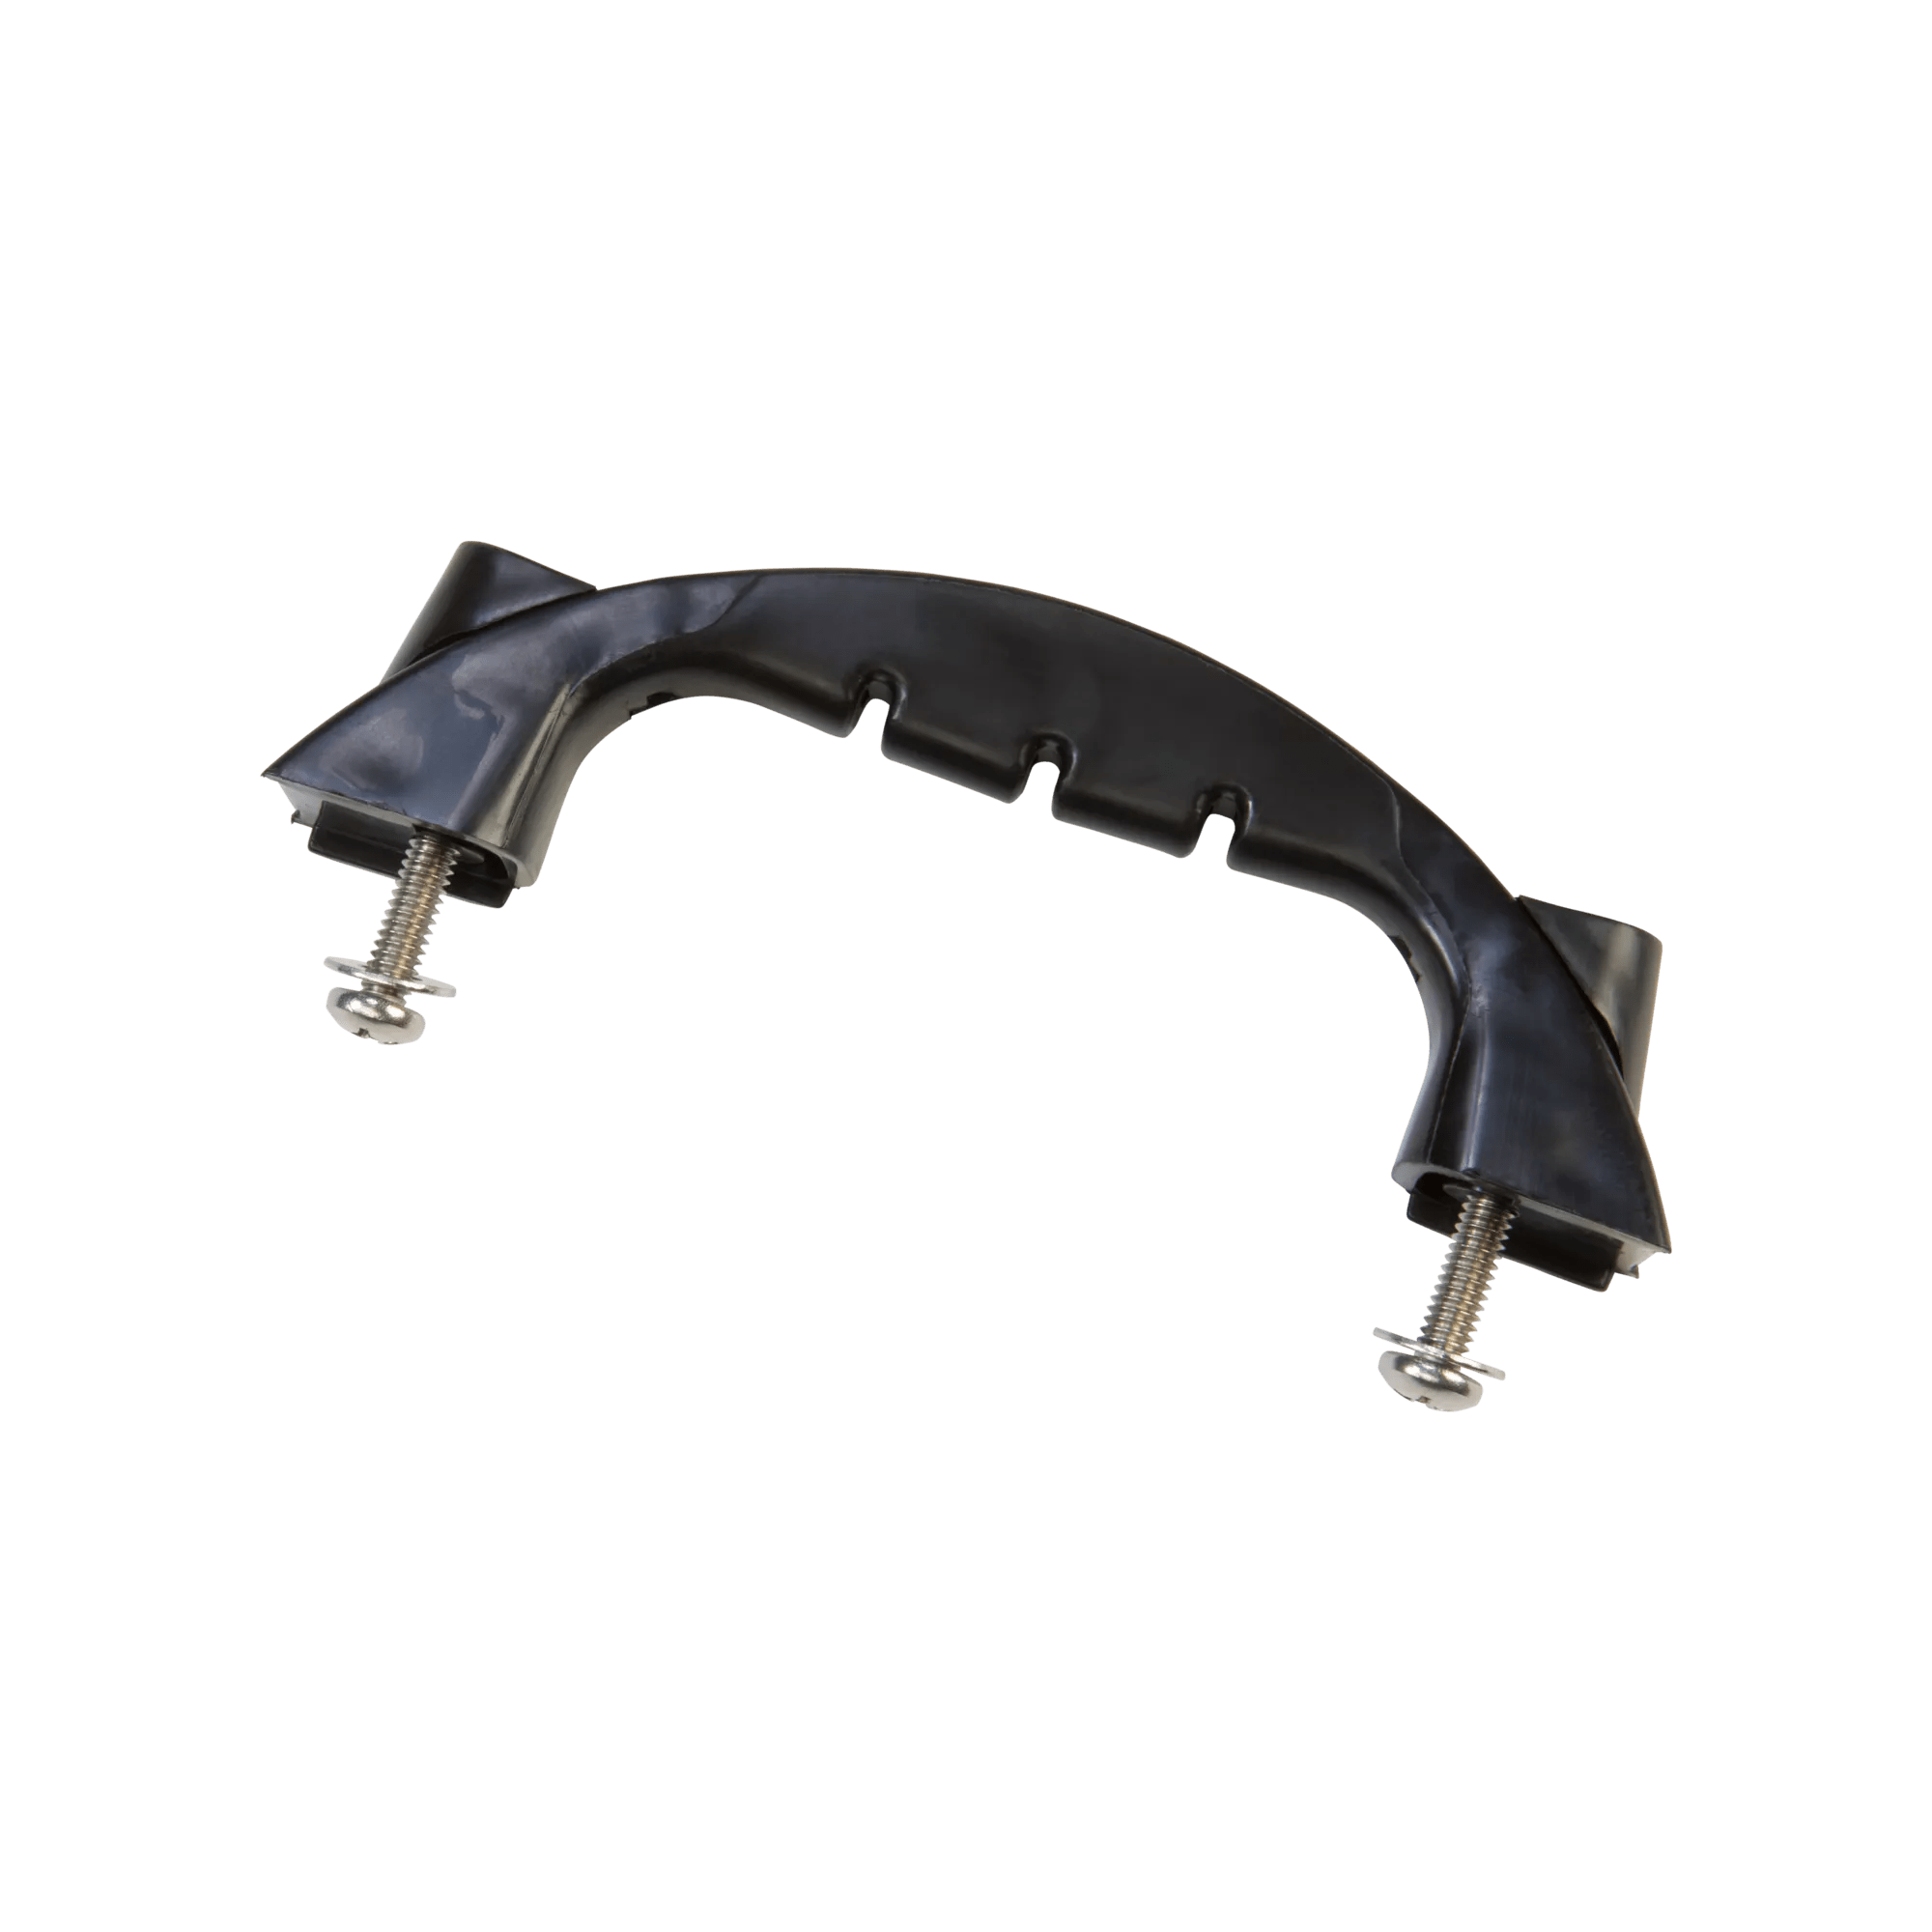 PELICAN - Pedal Boat Handle Kit in Black -  - PS0639 - ISO 